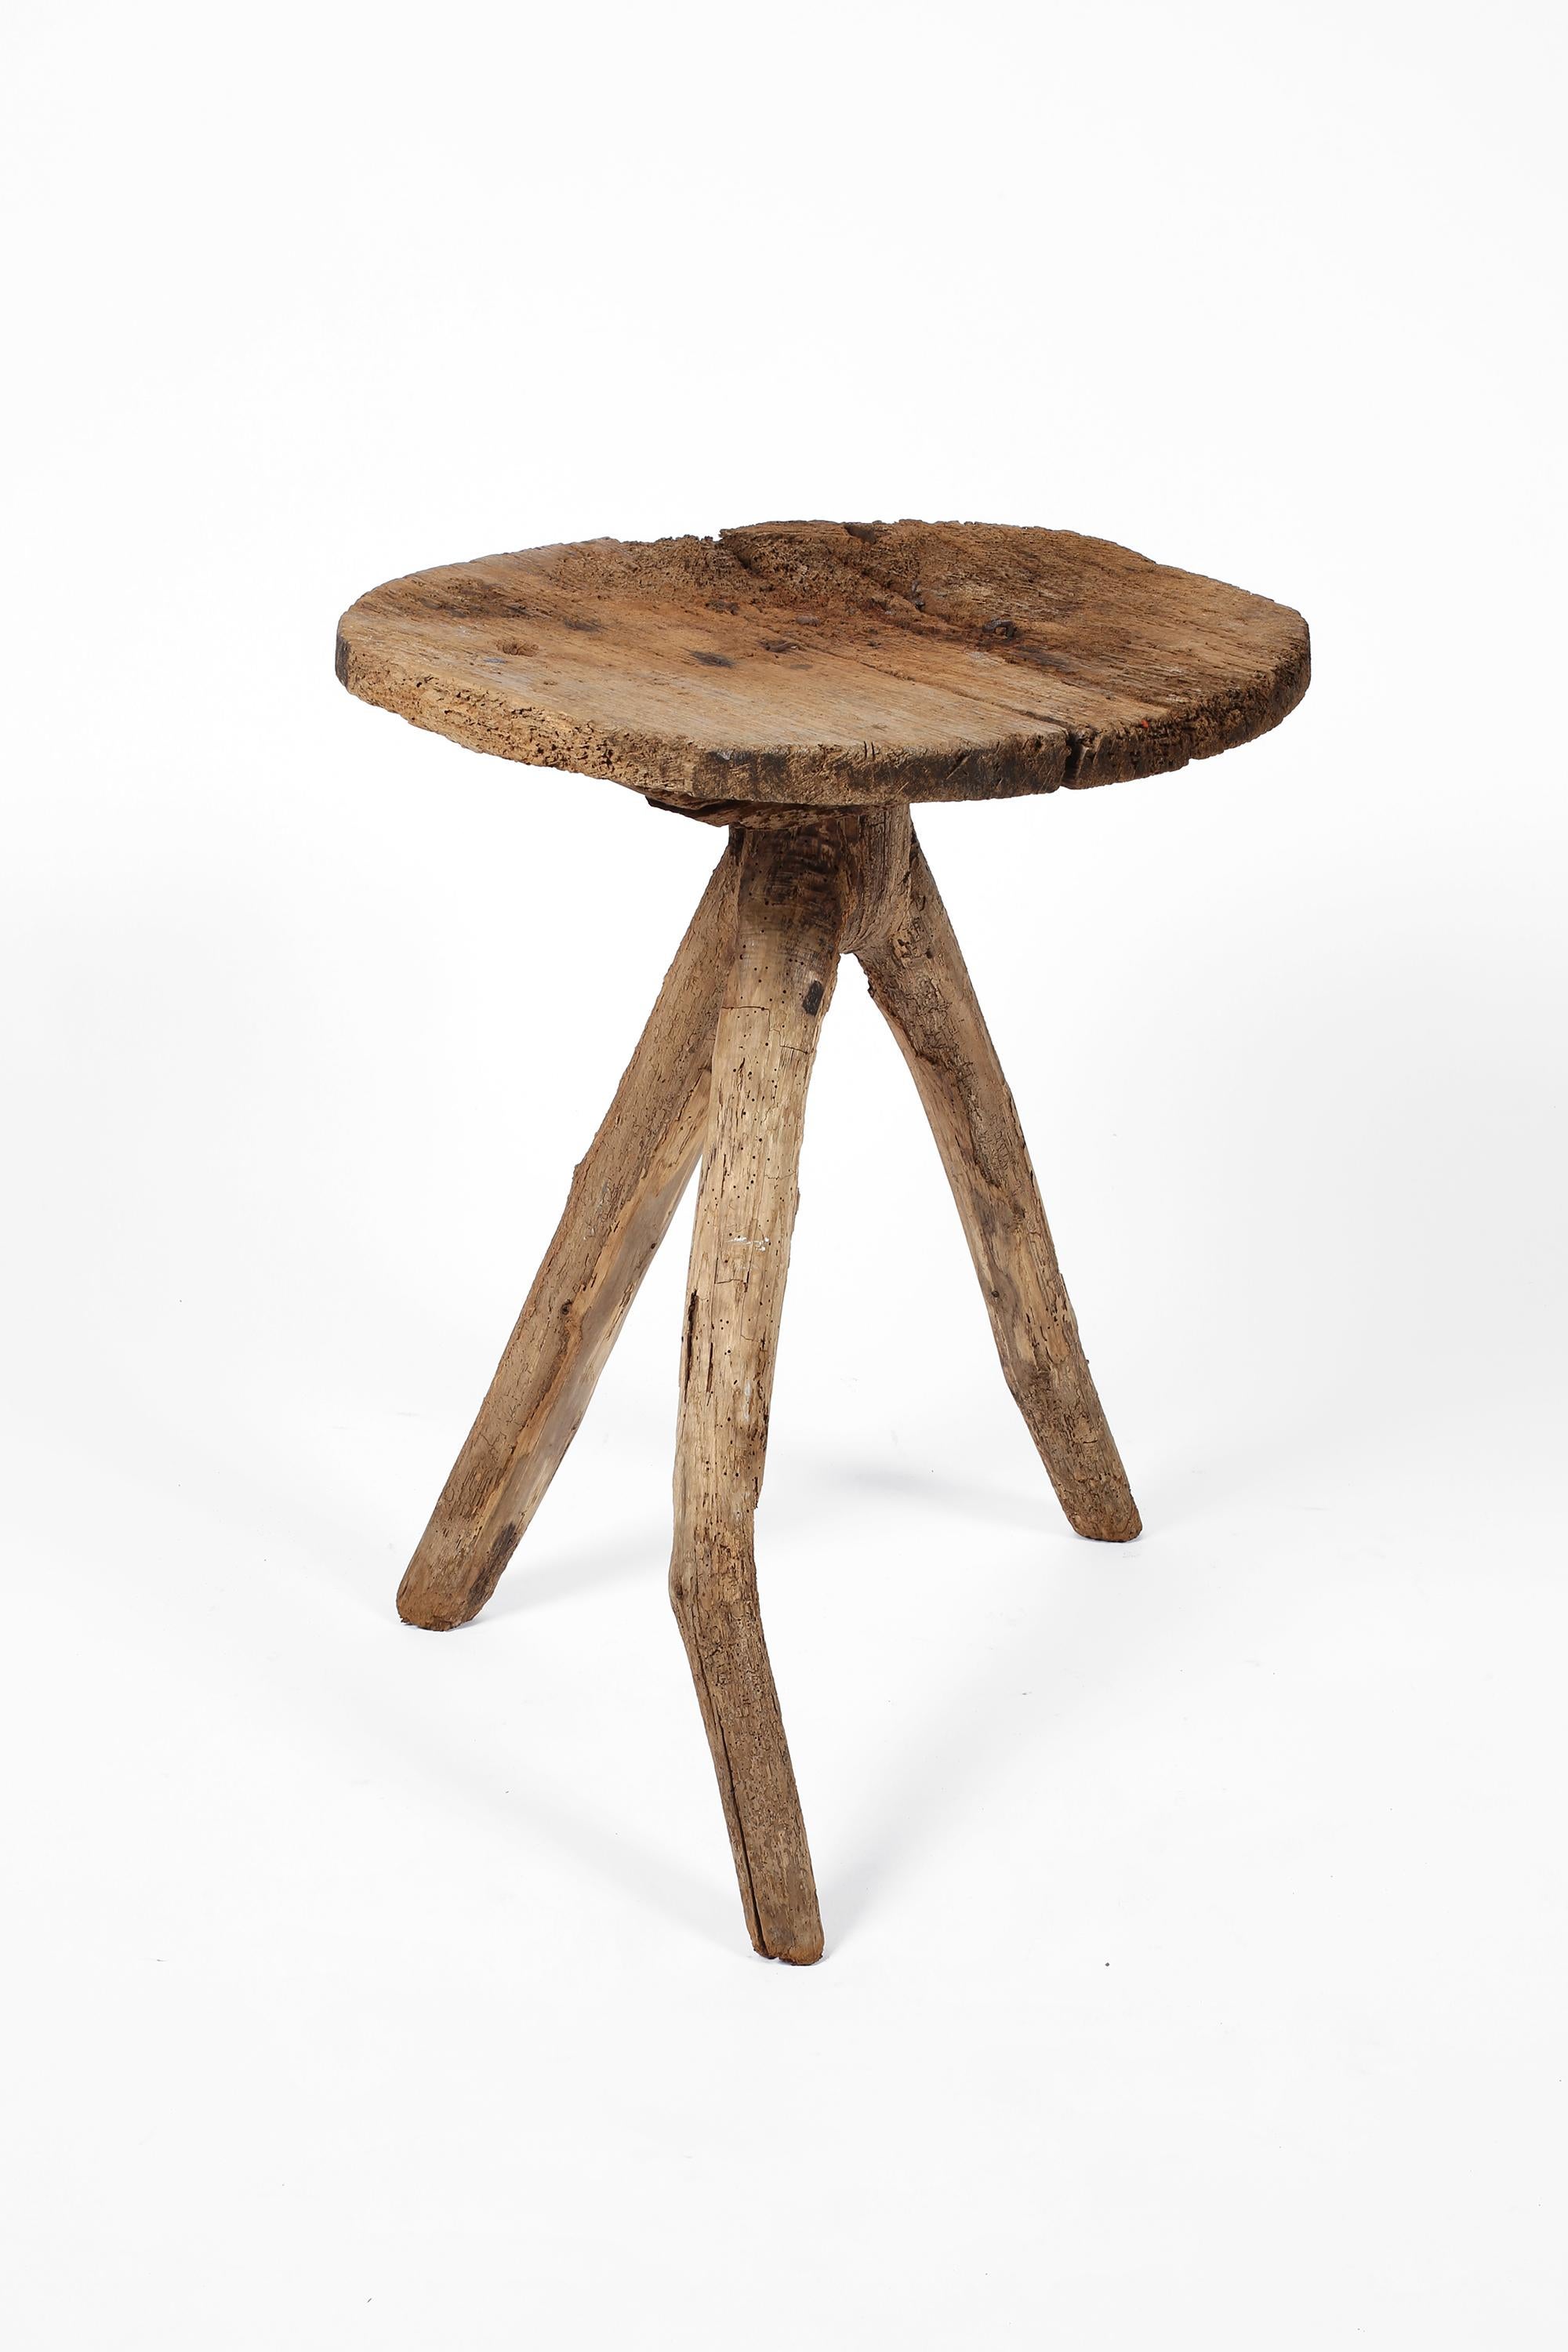 A highly original and primitive mountain table constructed from mixed timbers. The heavily patinated and time-worn with visible iron nails, the circular top honestly fixed to an organic tripod base. French, c. 1750.